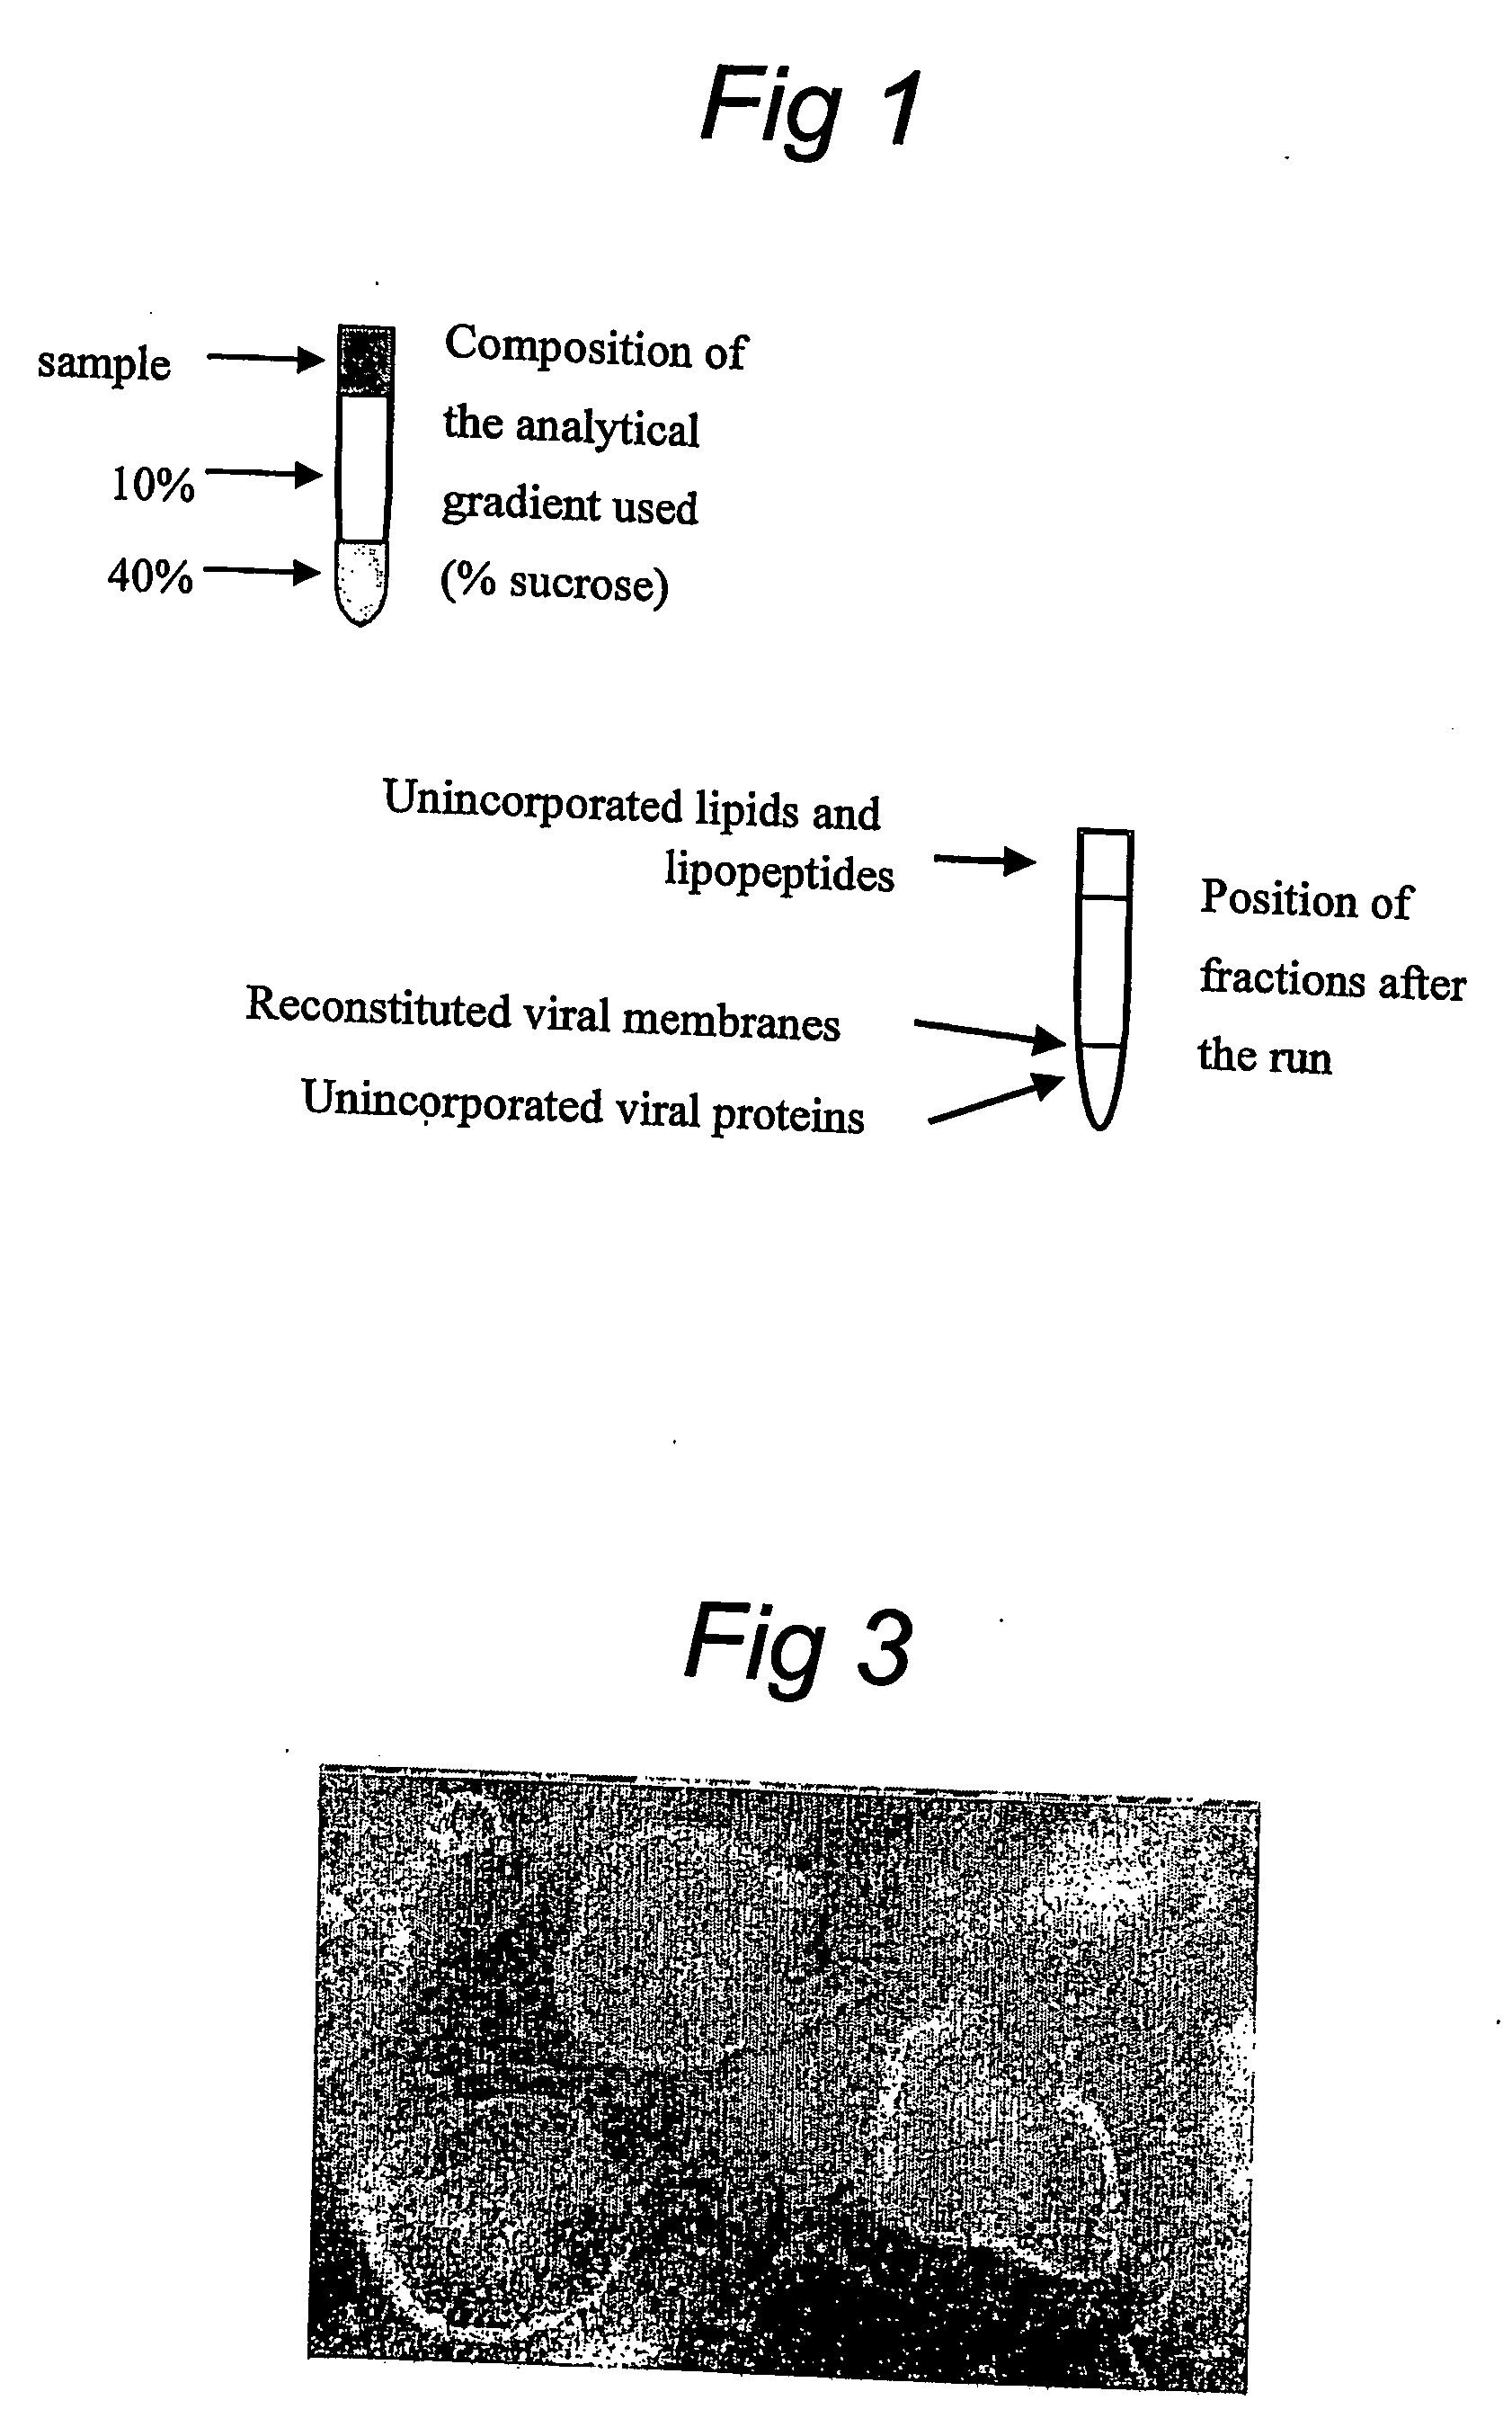 Functionallly reconstituted viral membranes containing adjuvant